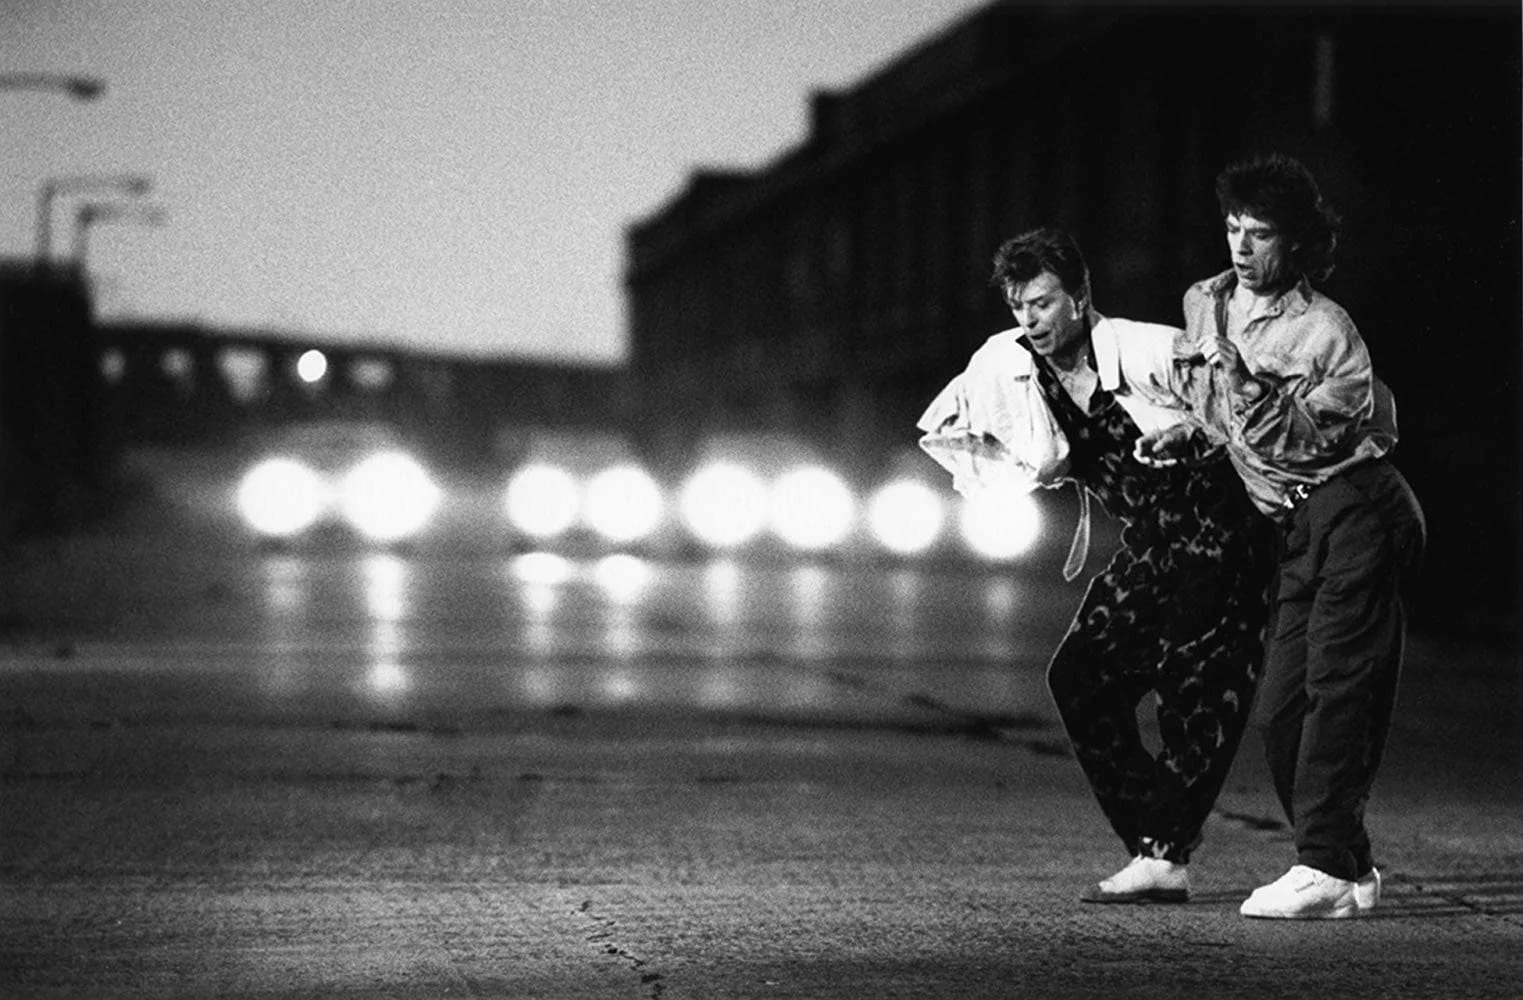 During the filming of the video for Dancing in the Street (1985). David Bowie and Mick Jagger